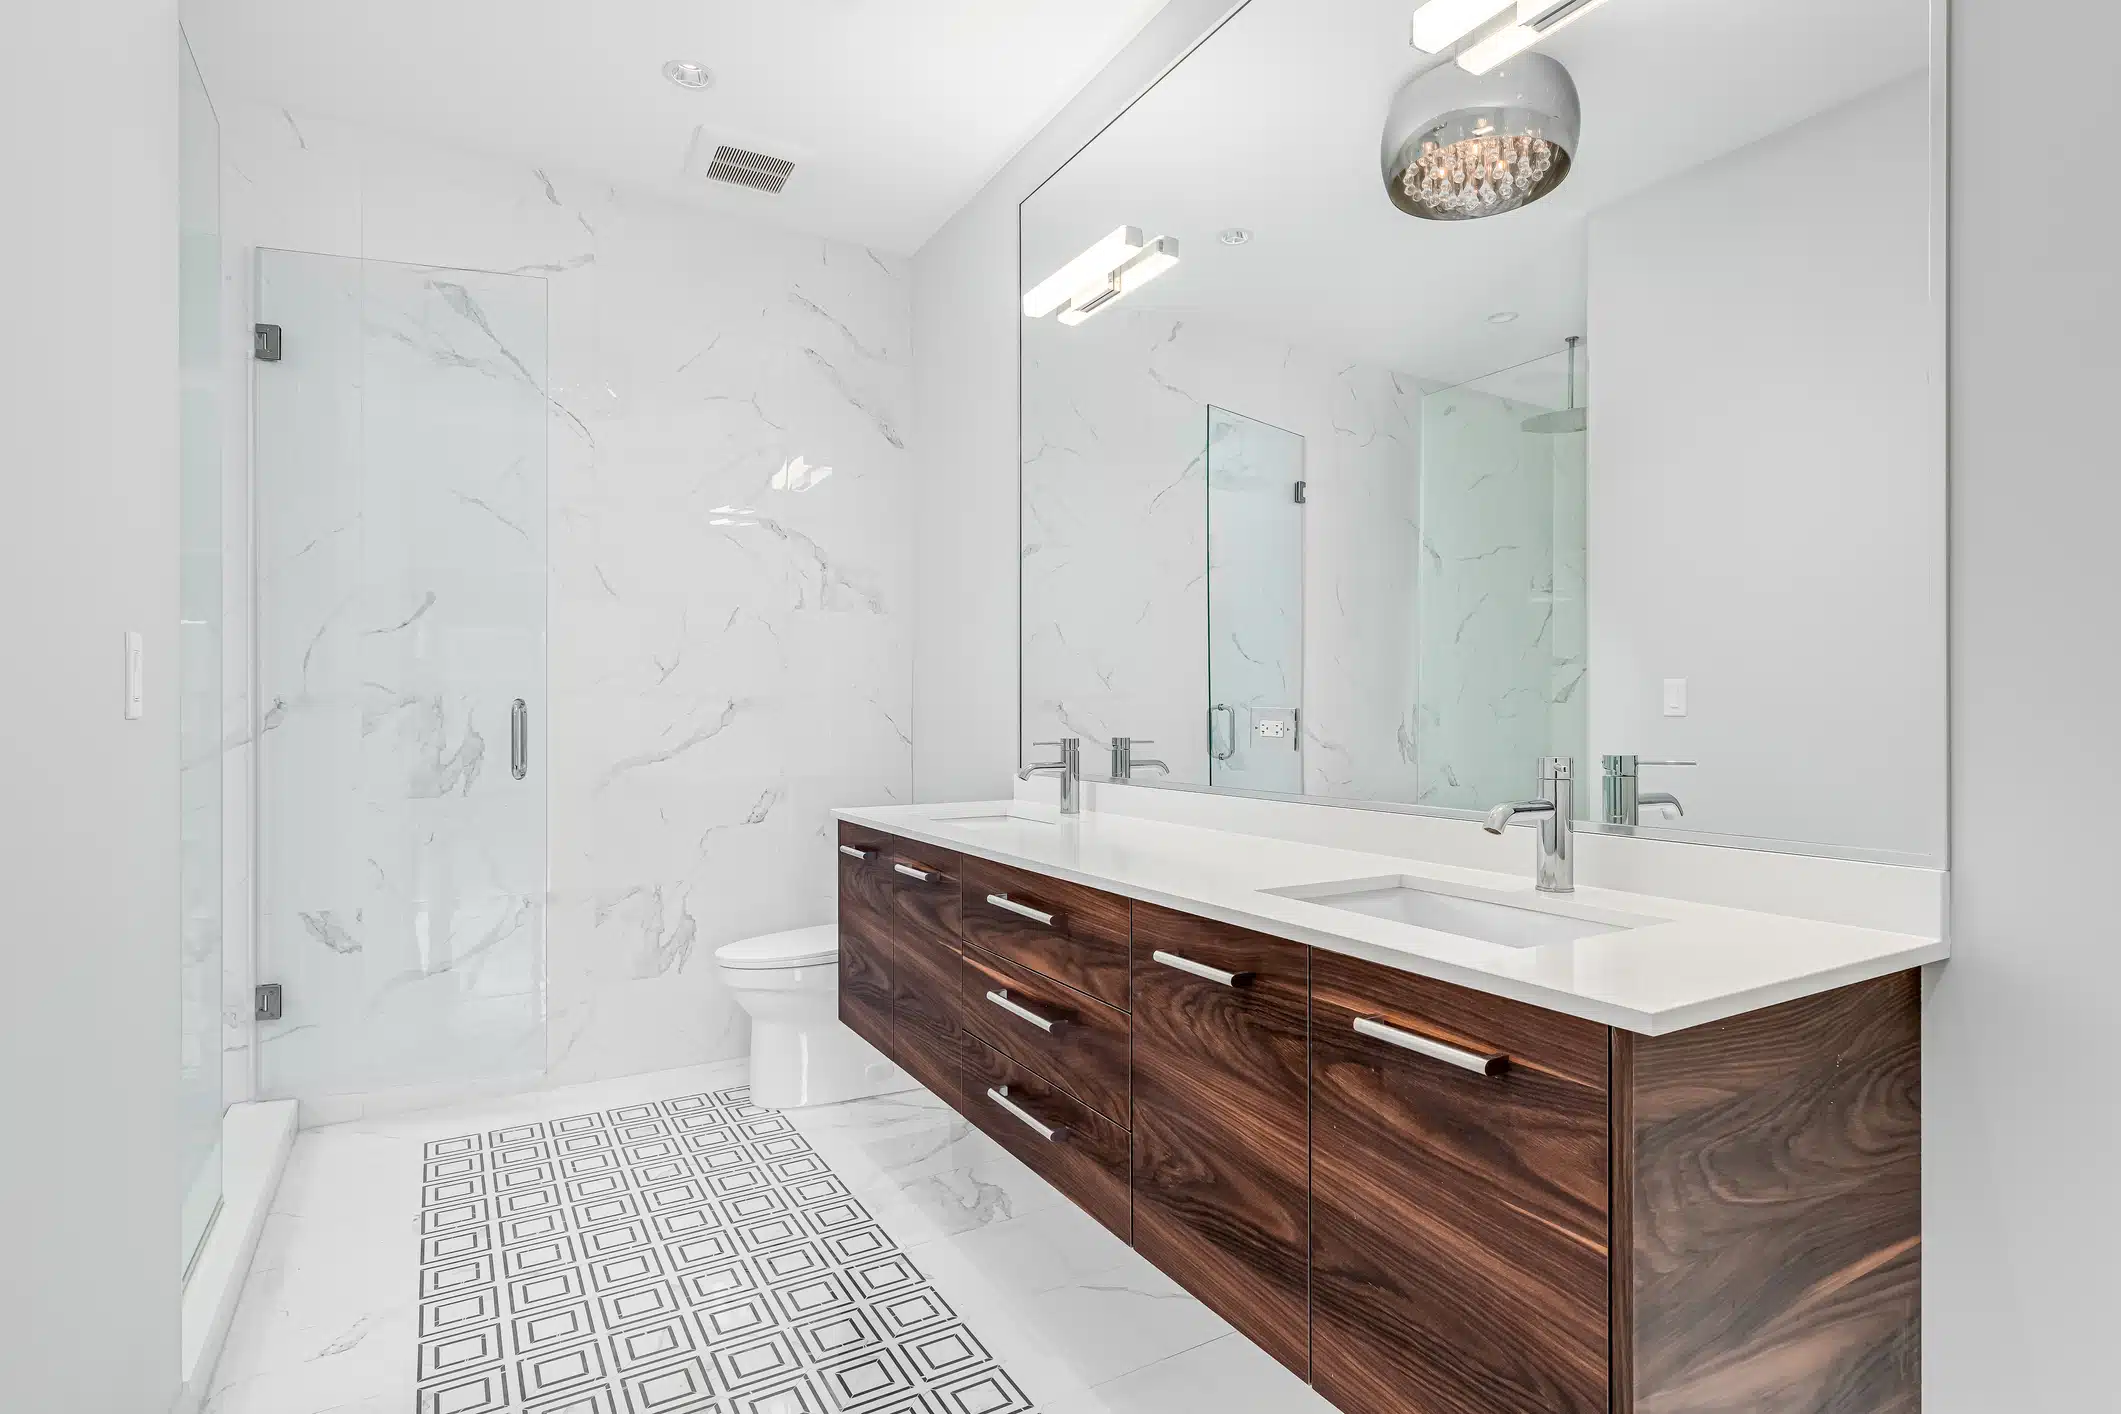 A bathroom with a wood cabinet, marble shower, and pattern tile floor.